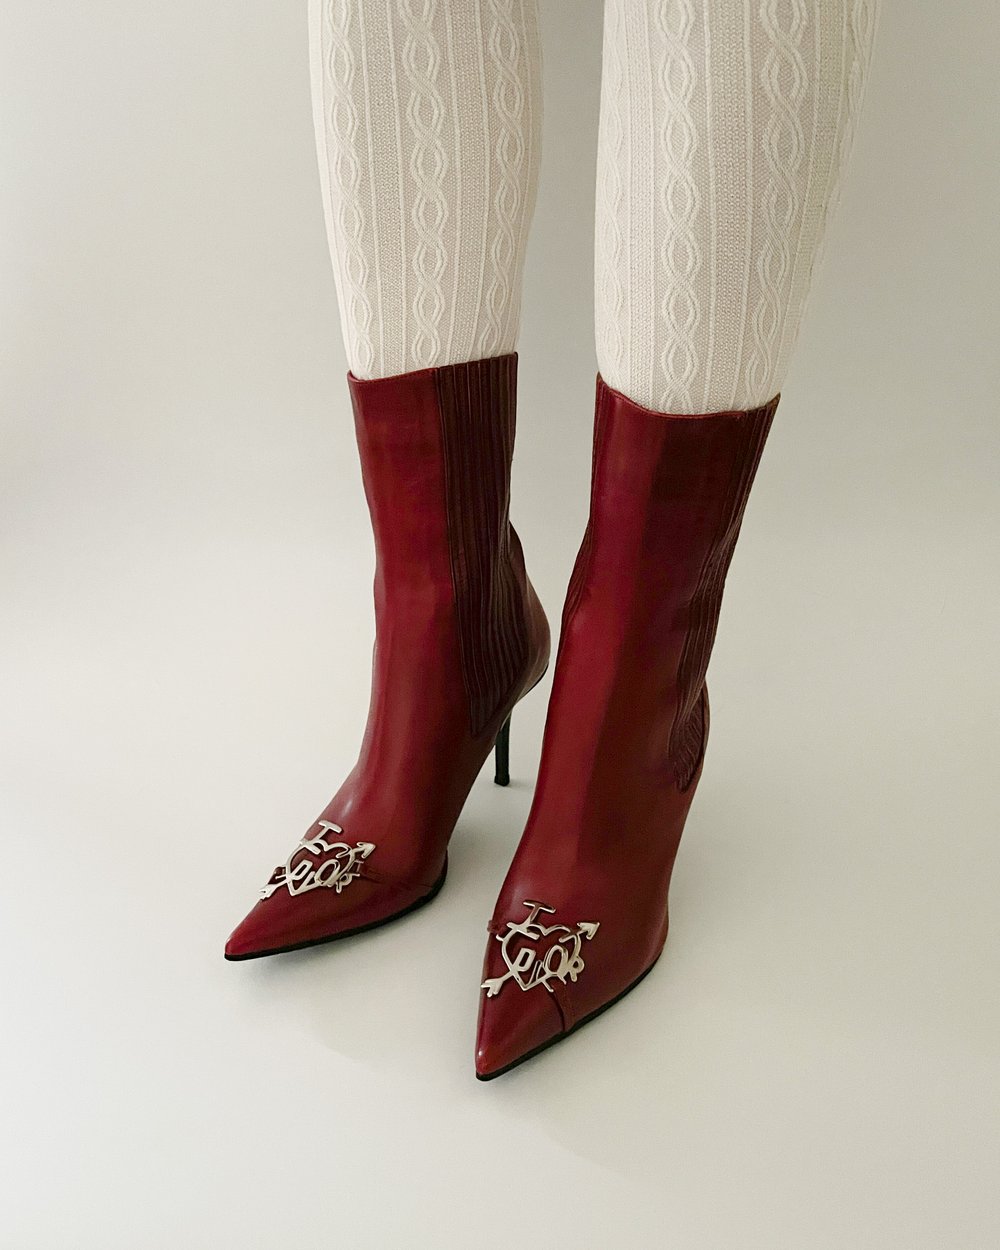 Christian Dior by John Galliano 2000's I HEART DIOR Iconic Leather Boot  Heels (US 7 / IT 38) — sororité.